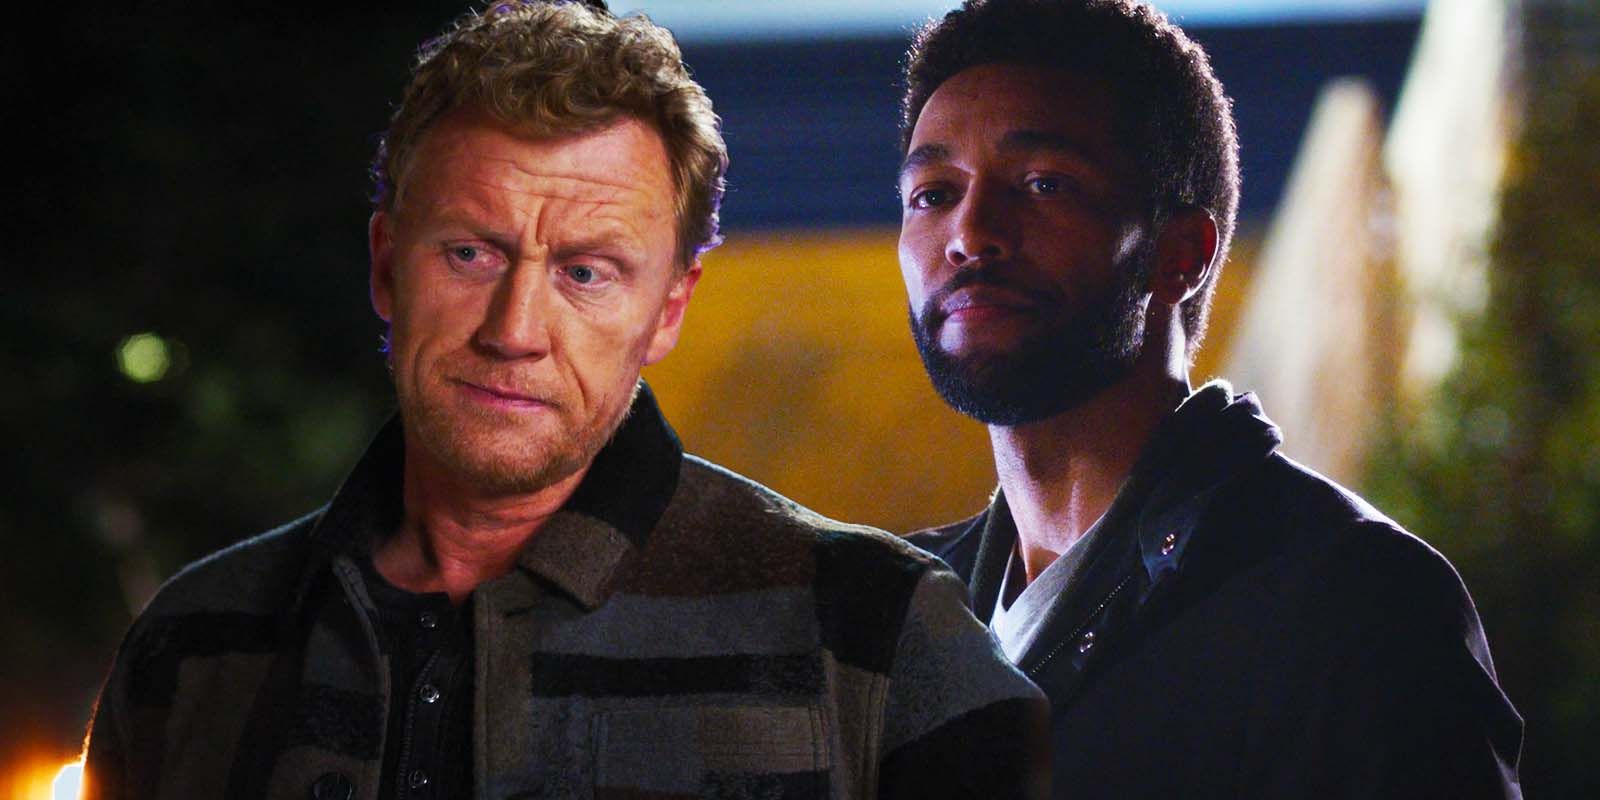 Kevin McKidd as Dr. Owen Hunt and Anthony Hill as Dr. Winston Ndugu in Grey's Anatomy season 20 episode 3